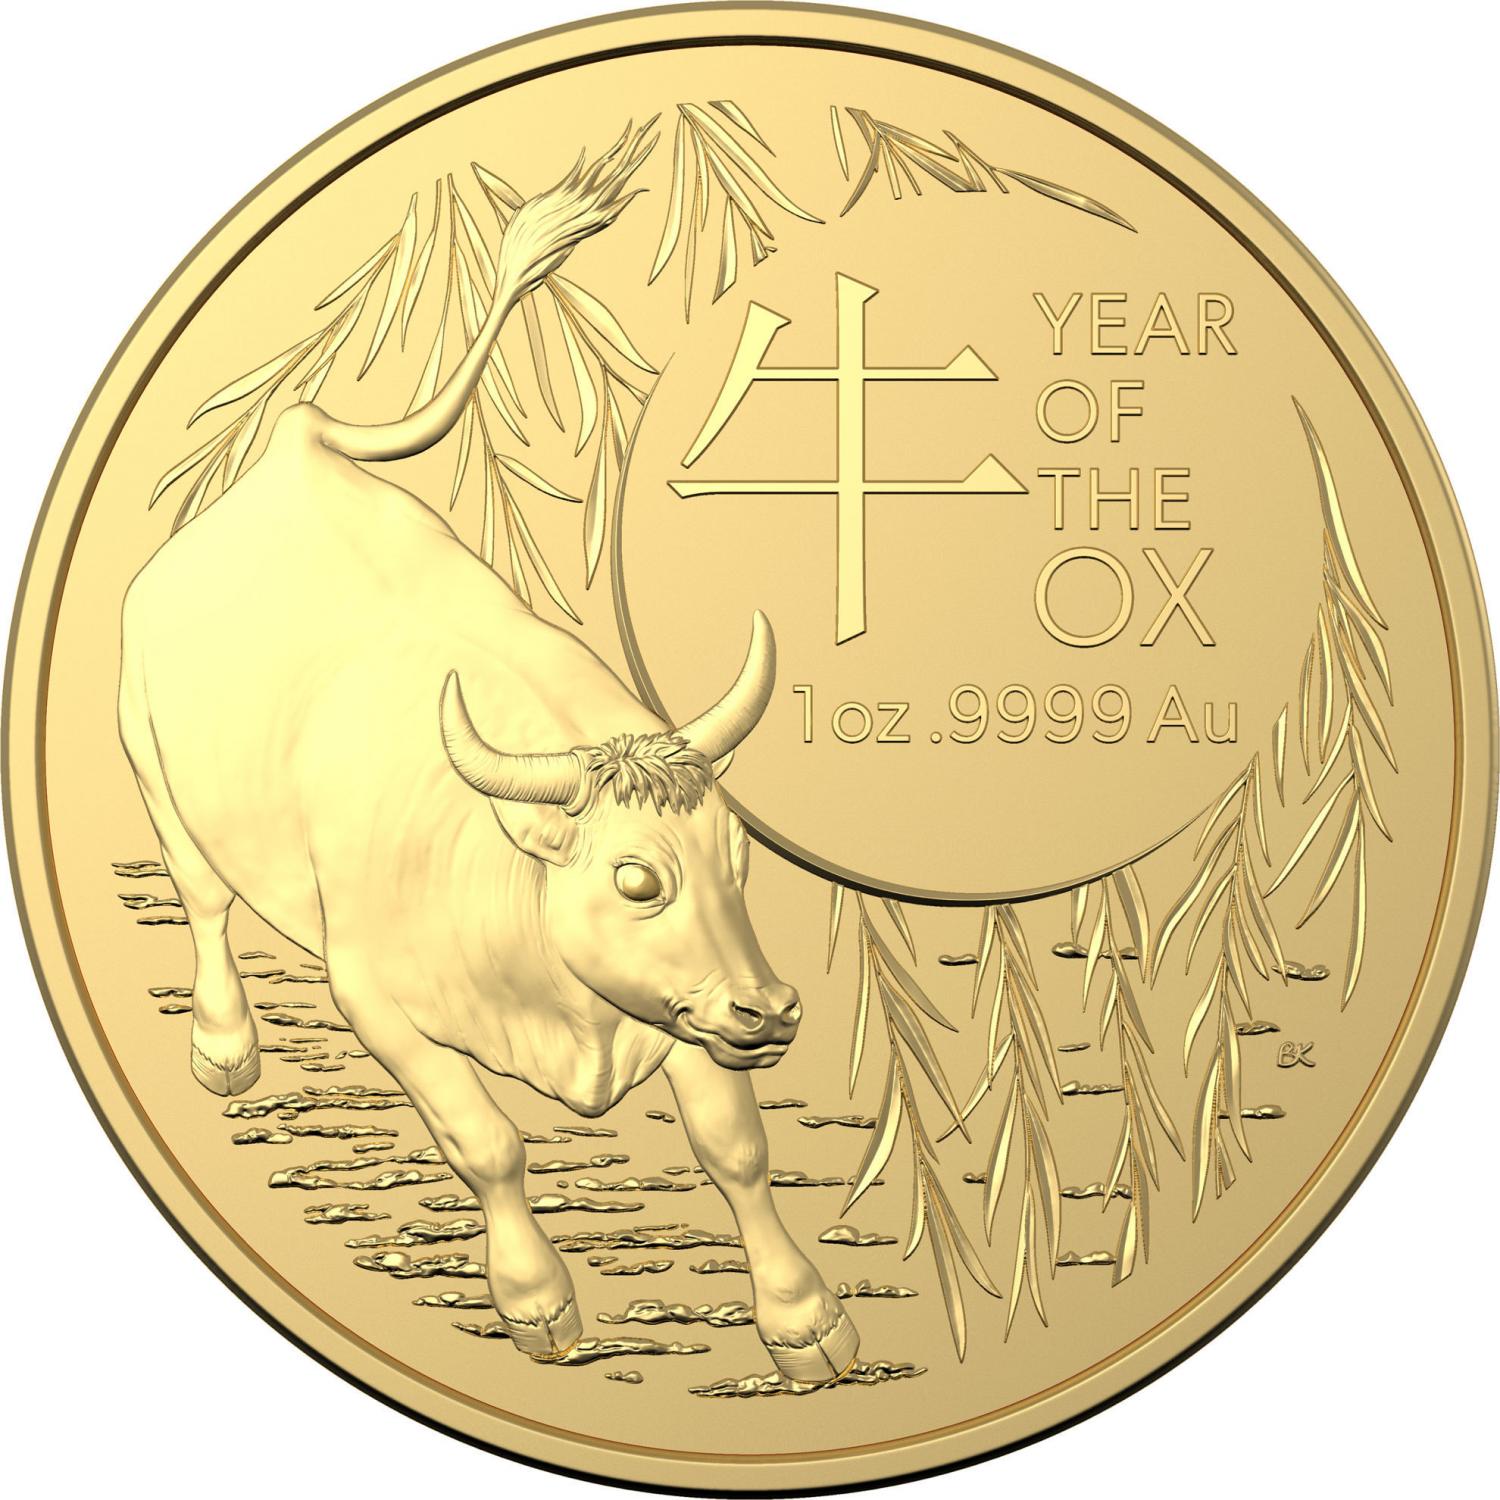 Thumbnail for 2021 $100 Year of the Ox Gold 99.9% Au 1oz Brilliant UNC Coin in Capsule